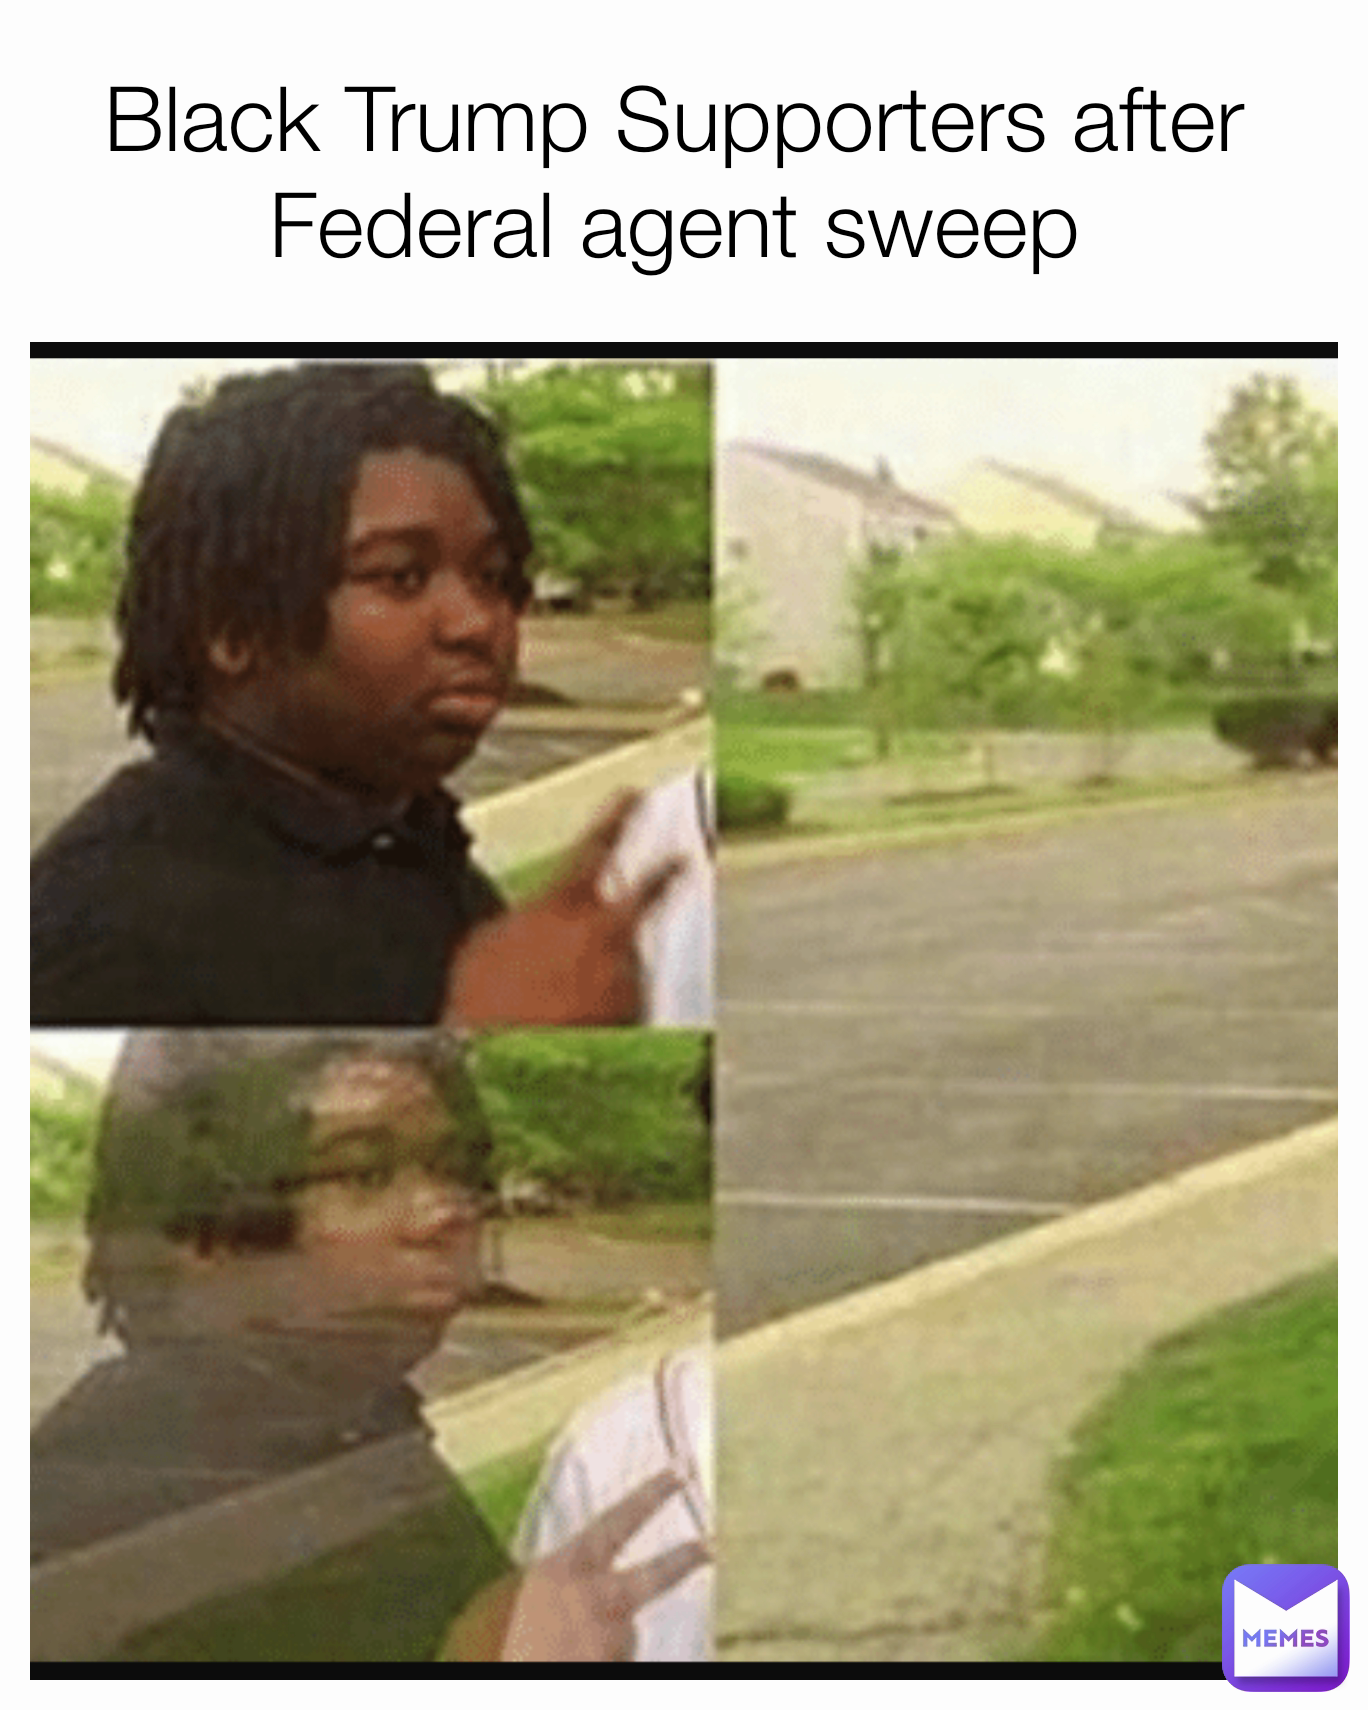 Black Trump Supporters after Federal agent sweep